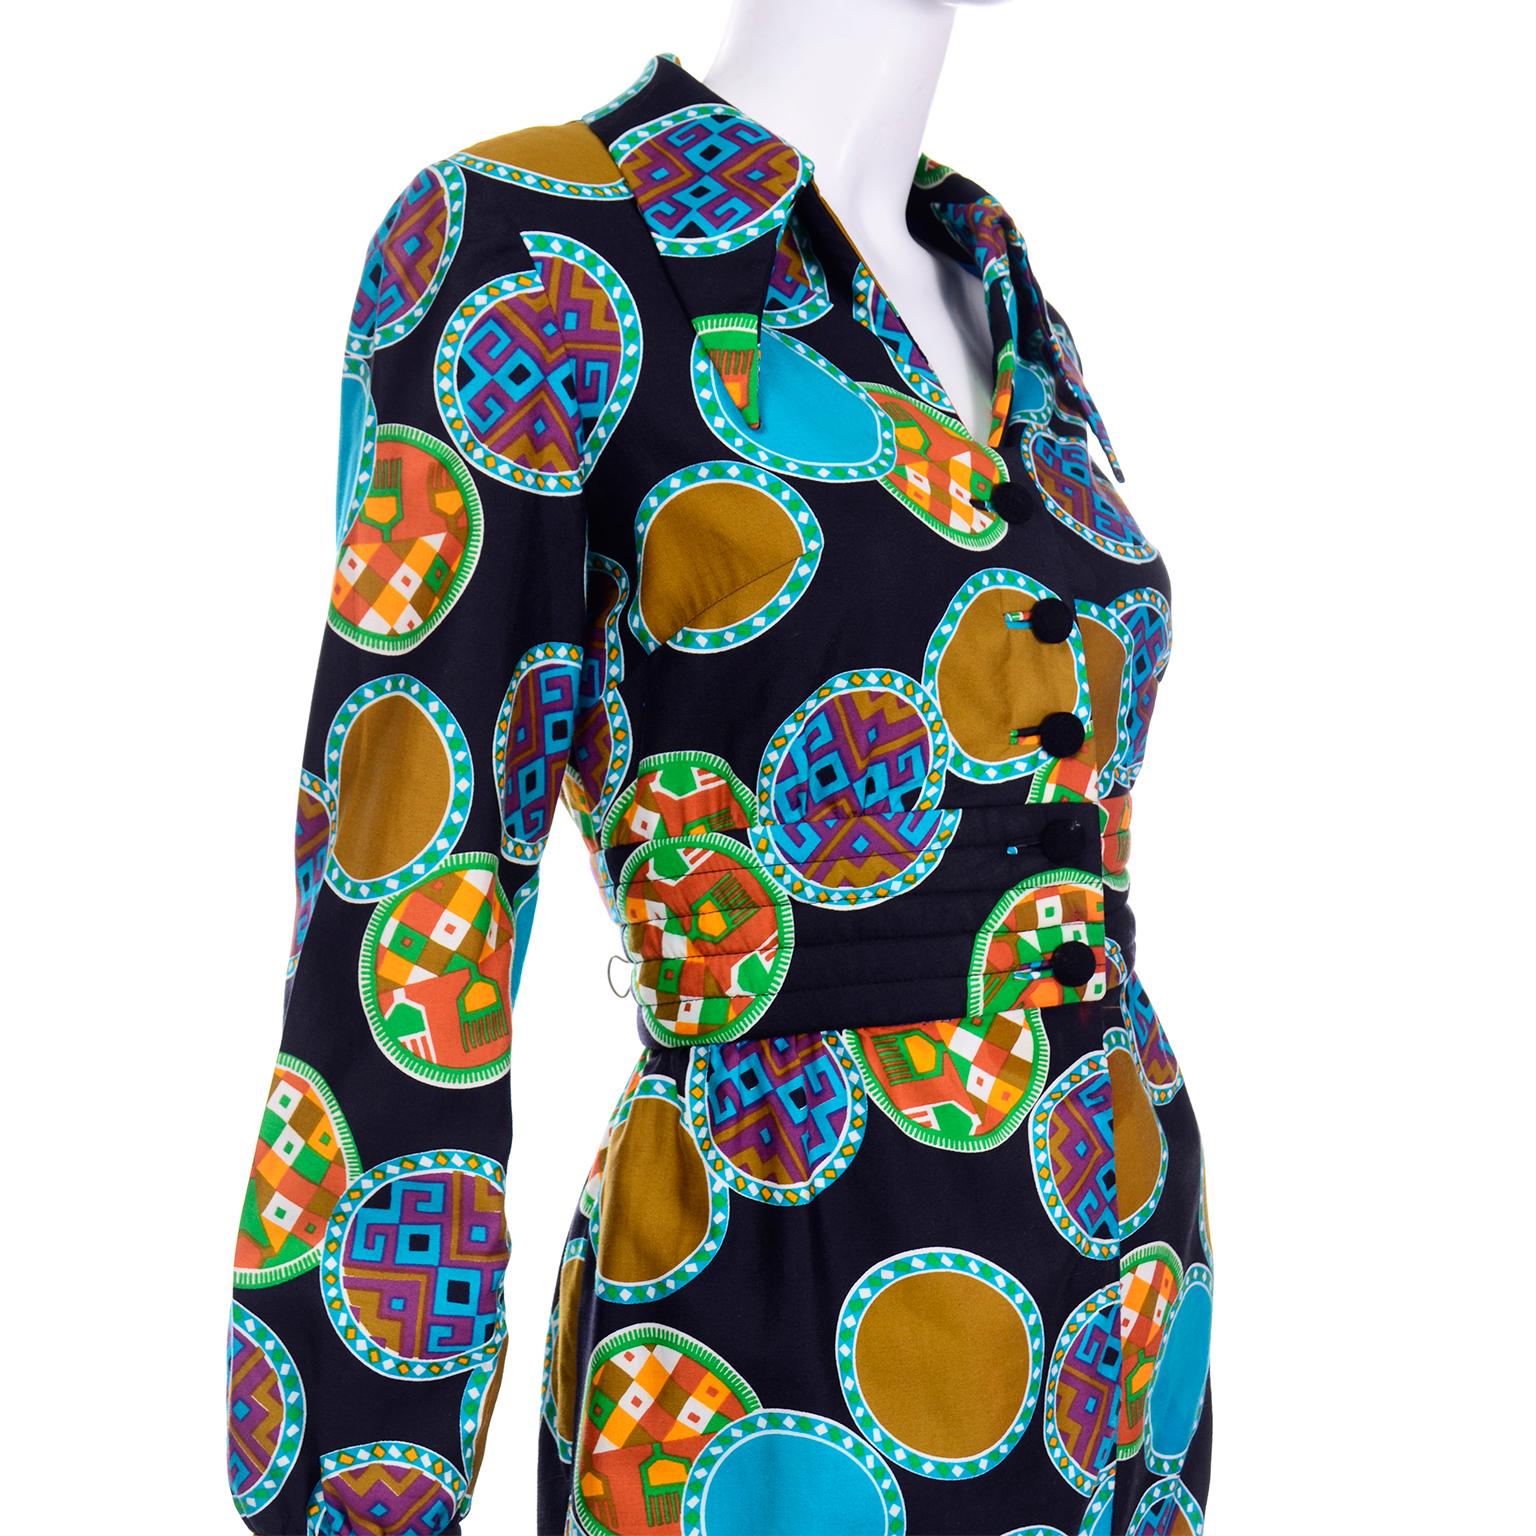 Vintage Dynasty Cotton Maxi Dress in Colorful Medallion Print With Pockets 2